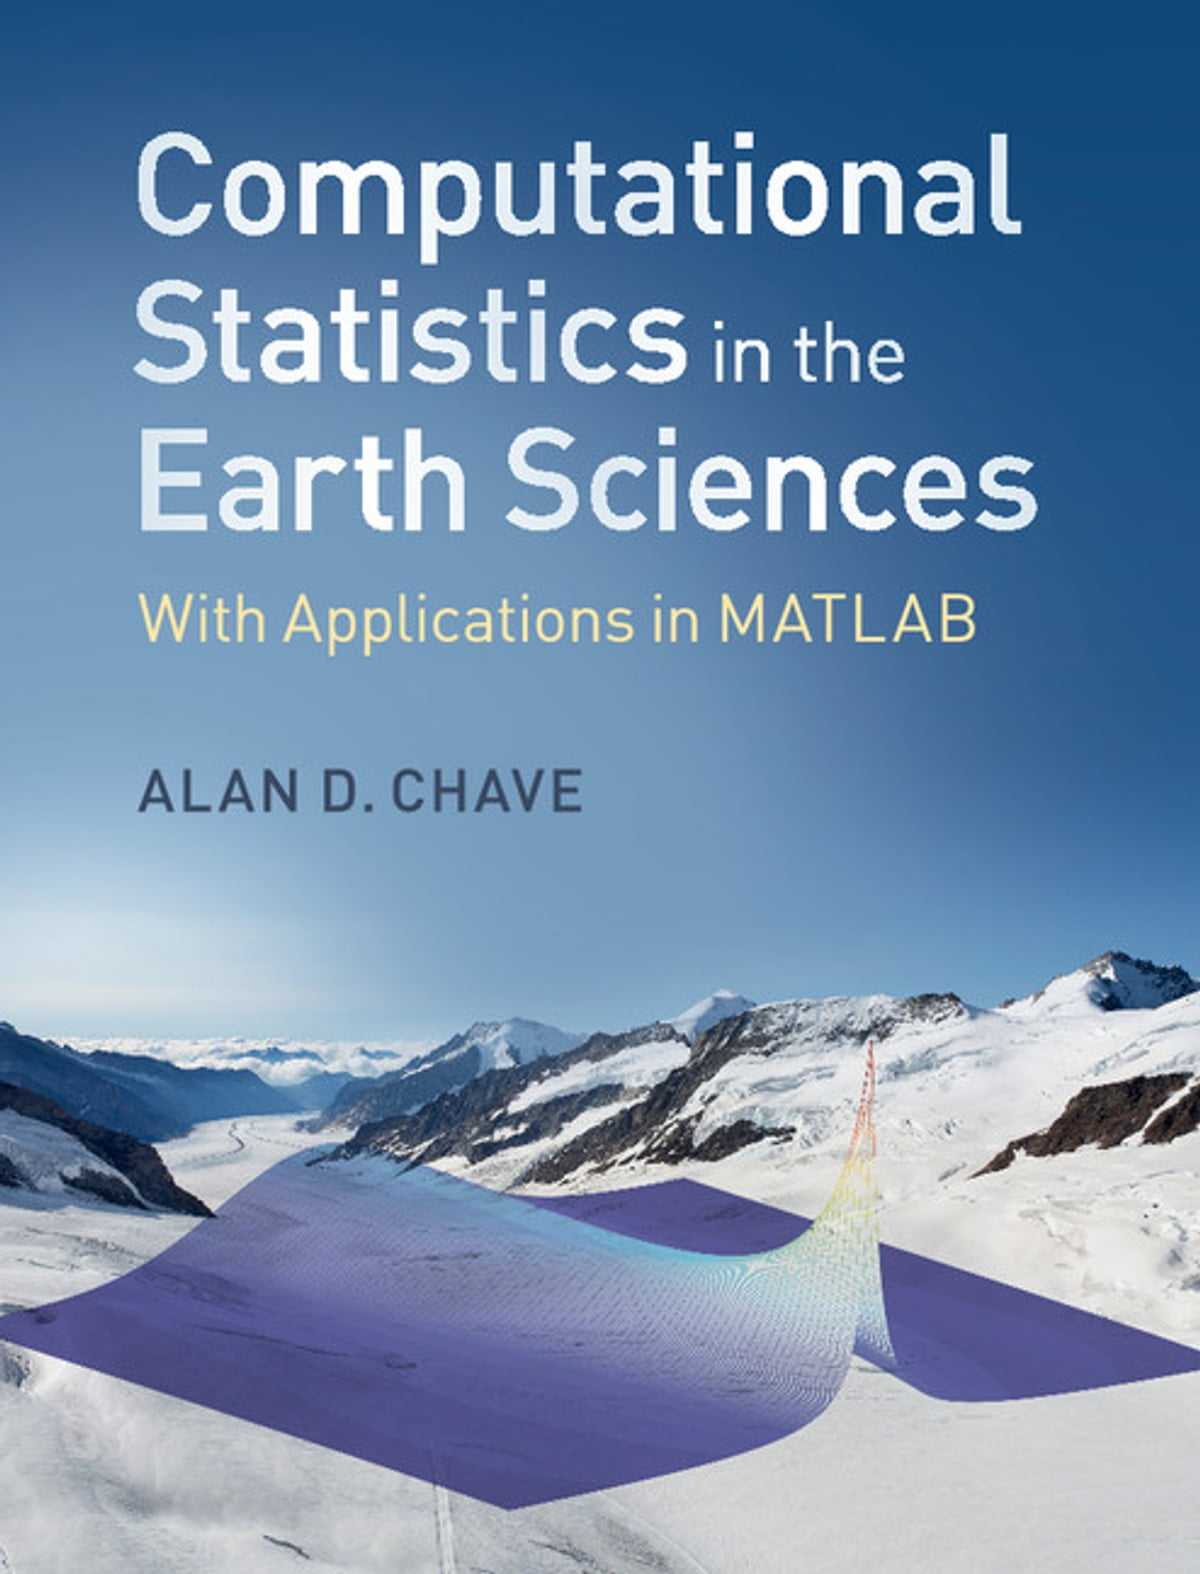 Computational statistics in the earth sciences with applications in MATLAB